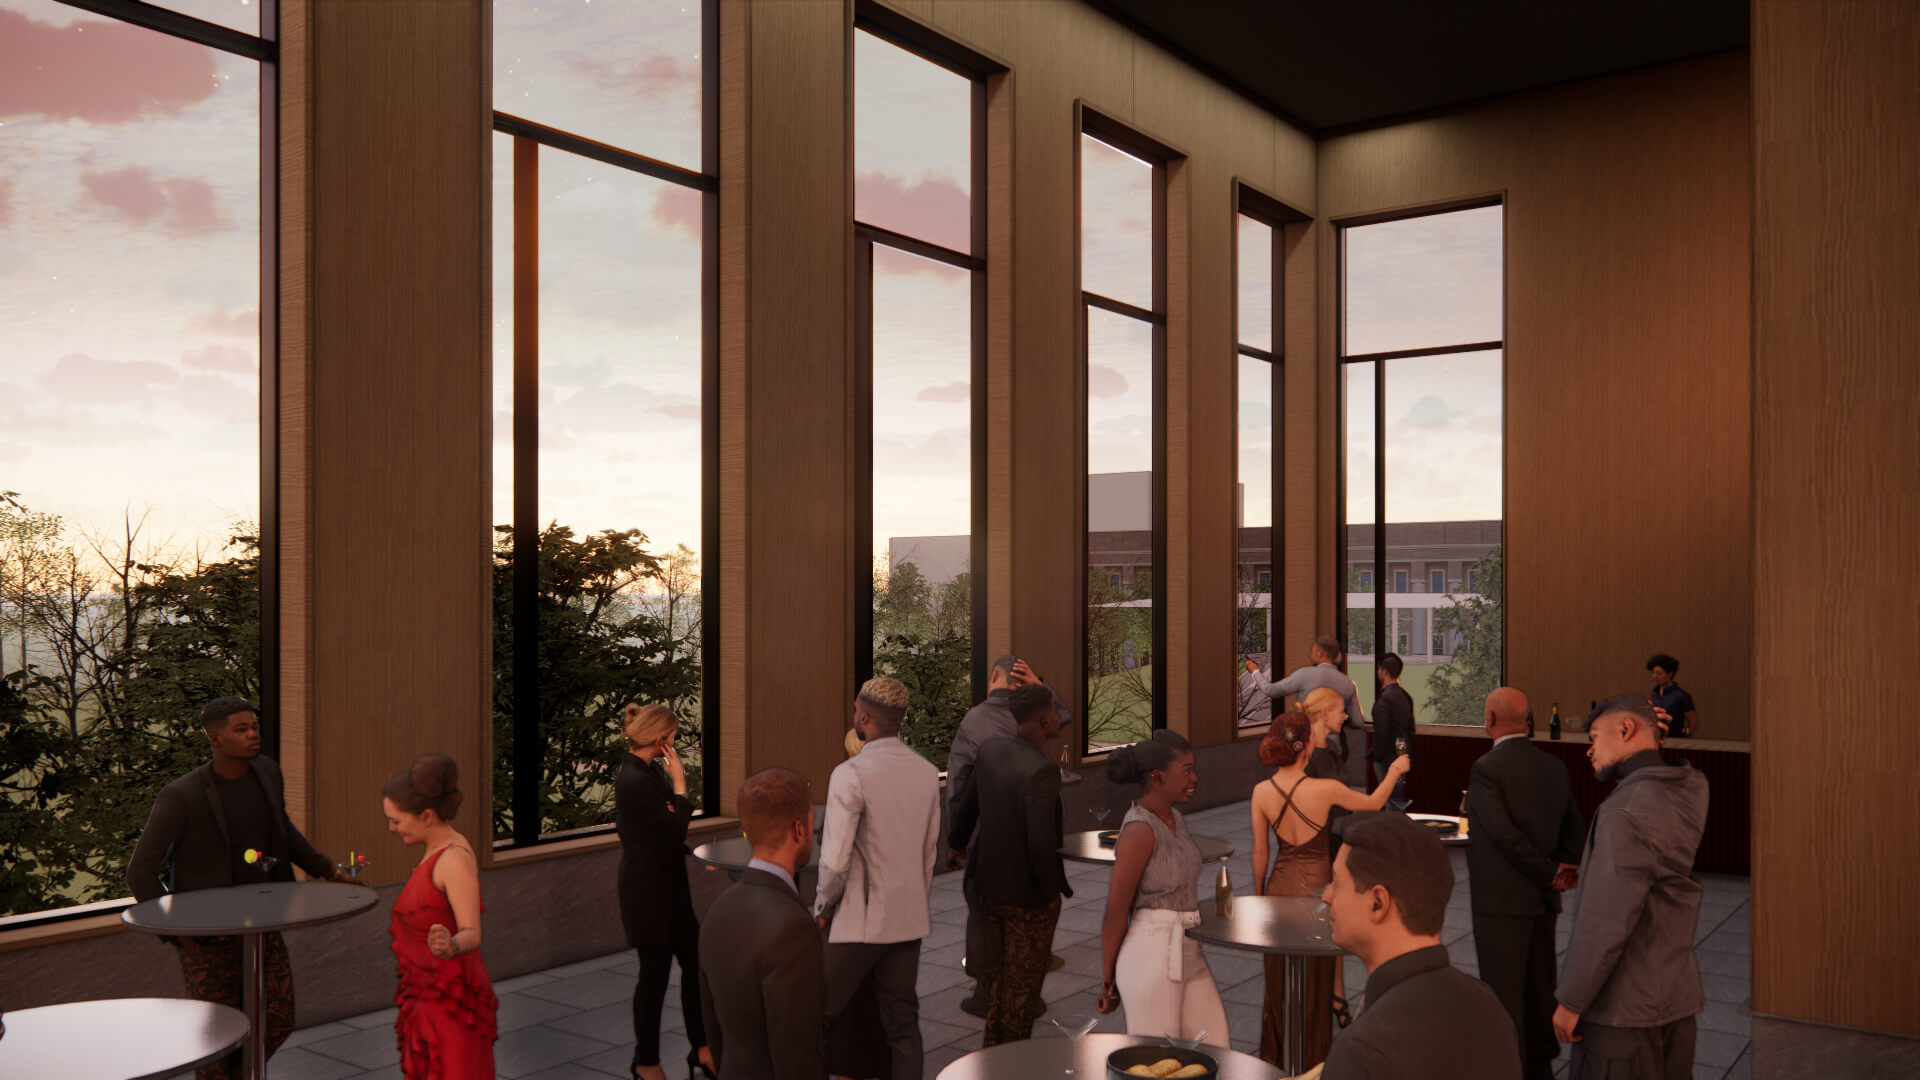 event space for Rice University’s Jones School of Business expansion